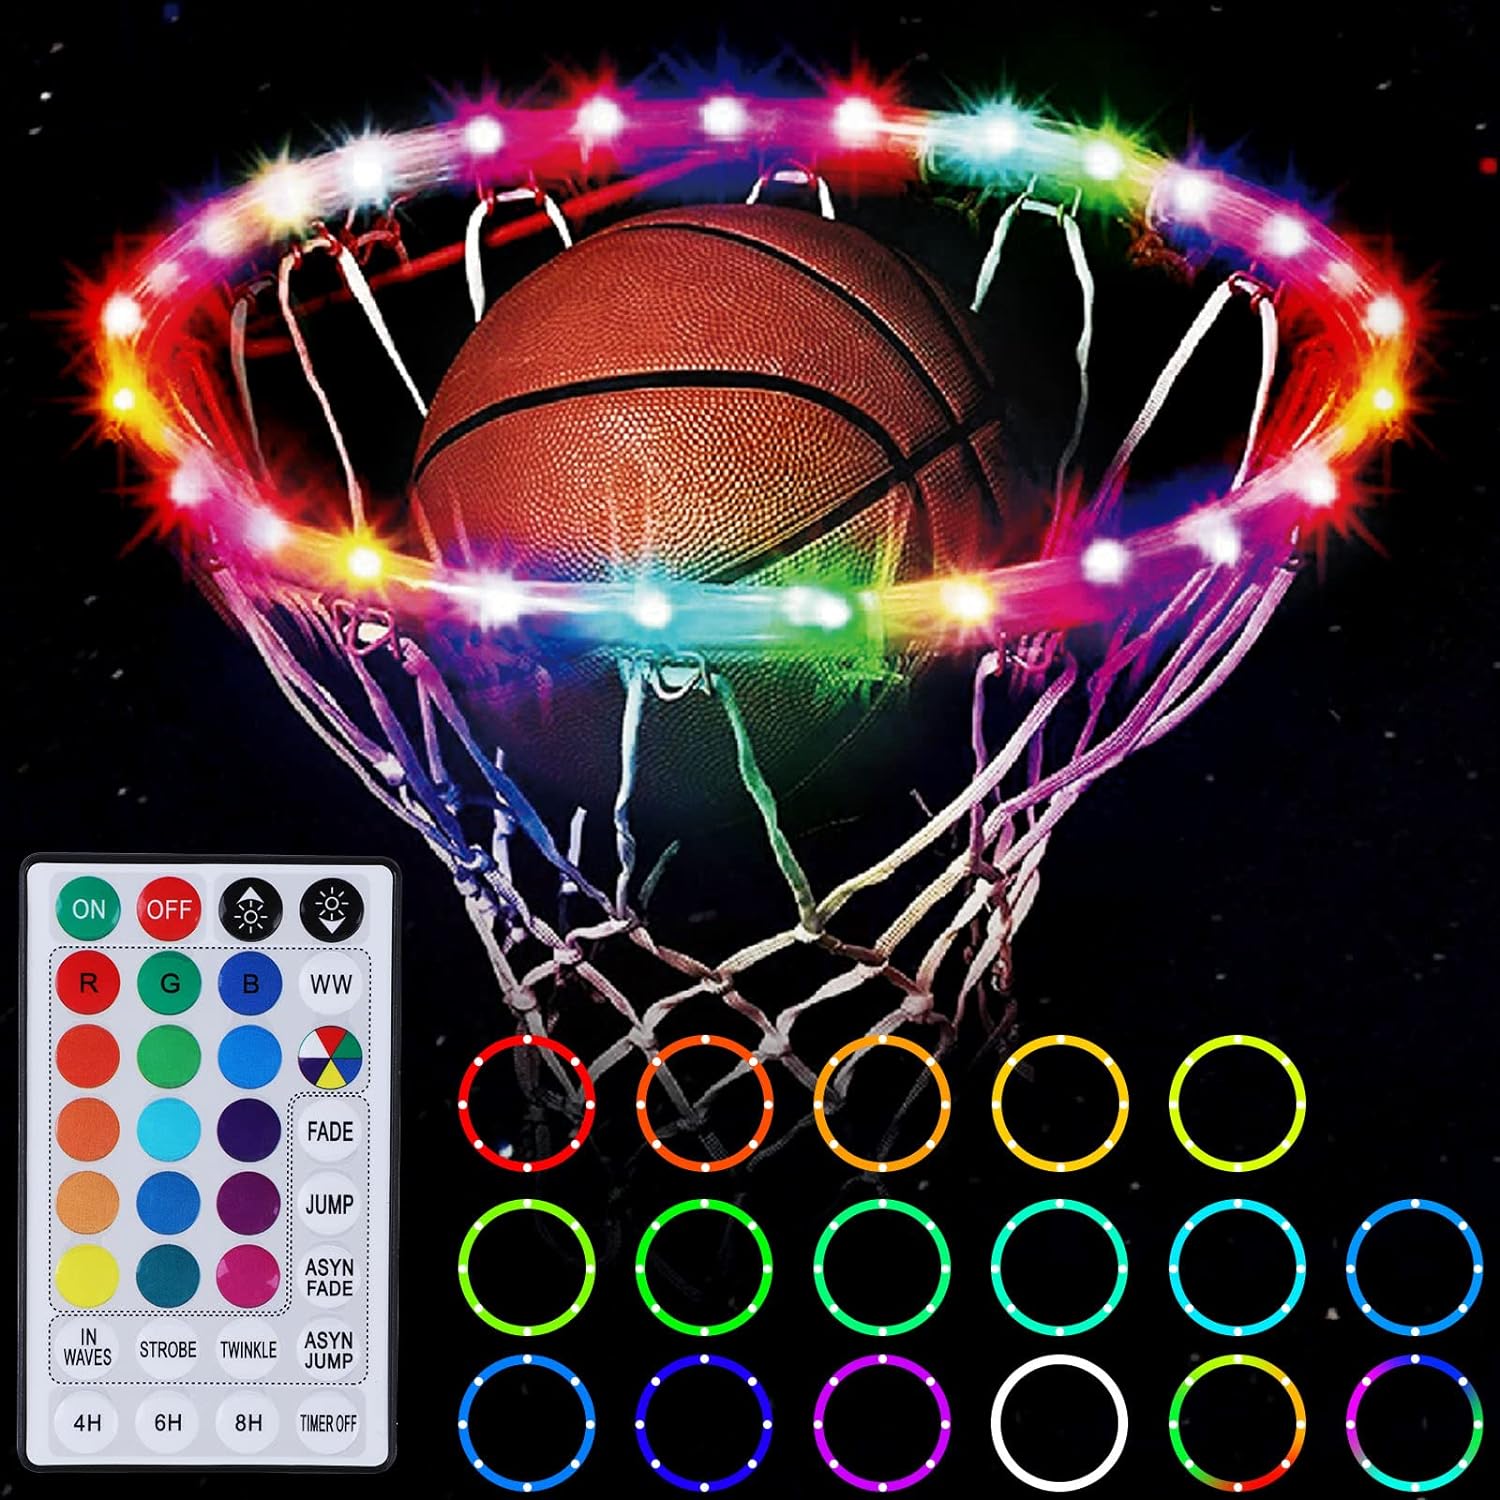 AOKESI LED Basketball Hoop Light,Remote Control Basketball Rim Light with 17 Colors 7 Lighting Modes & Timers,Waterproof Led Light,Super Bright to Play at Night Gift for Kids Basketball Fans